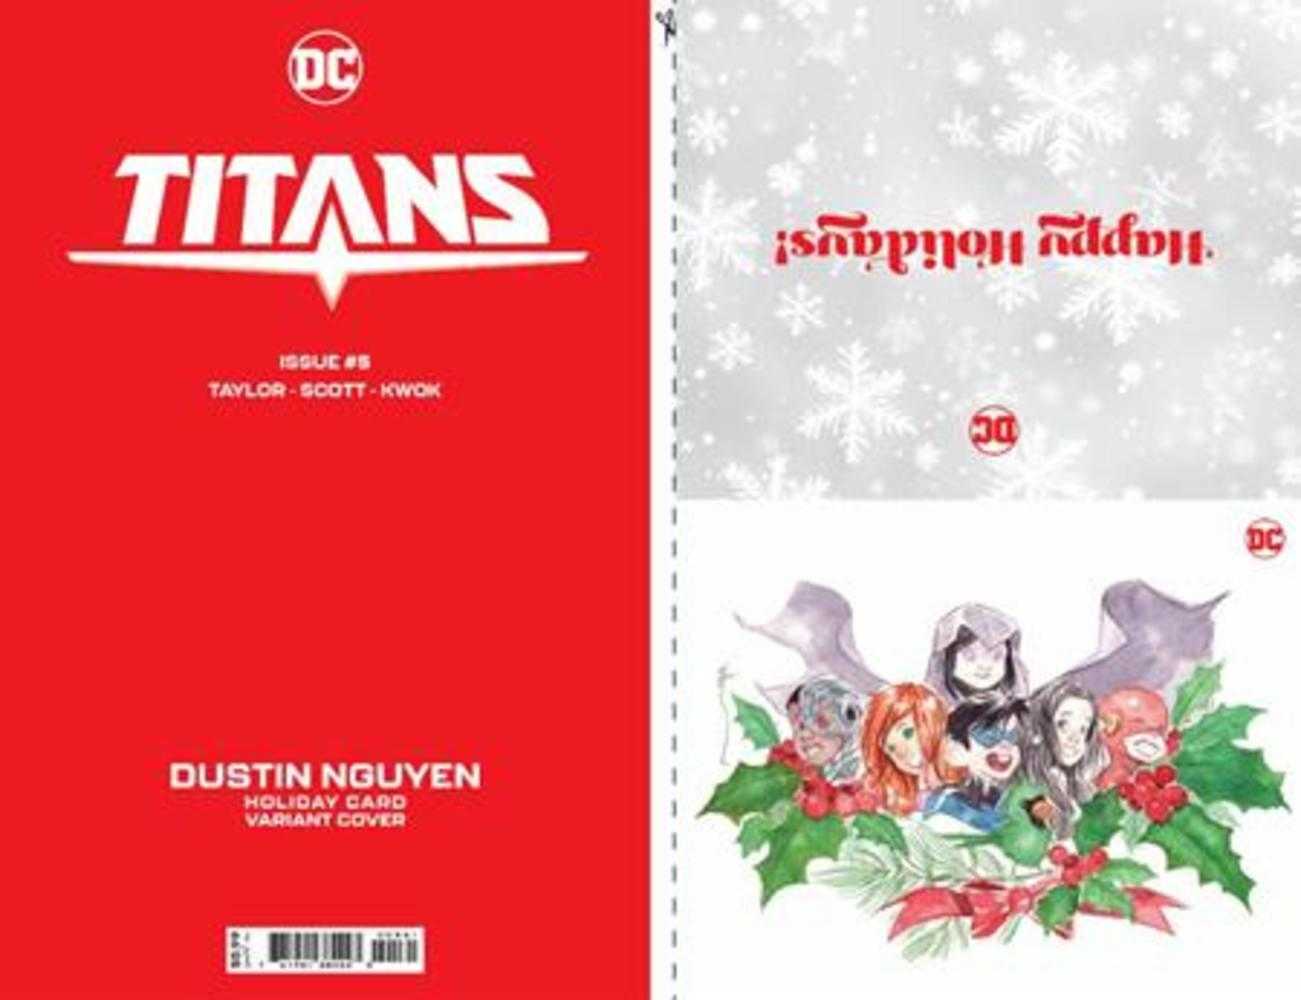 Titans #5 Cover D Dustin Nguyen DC Holiday Card Special Edition Variant